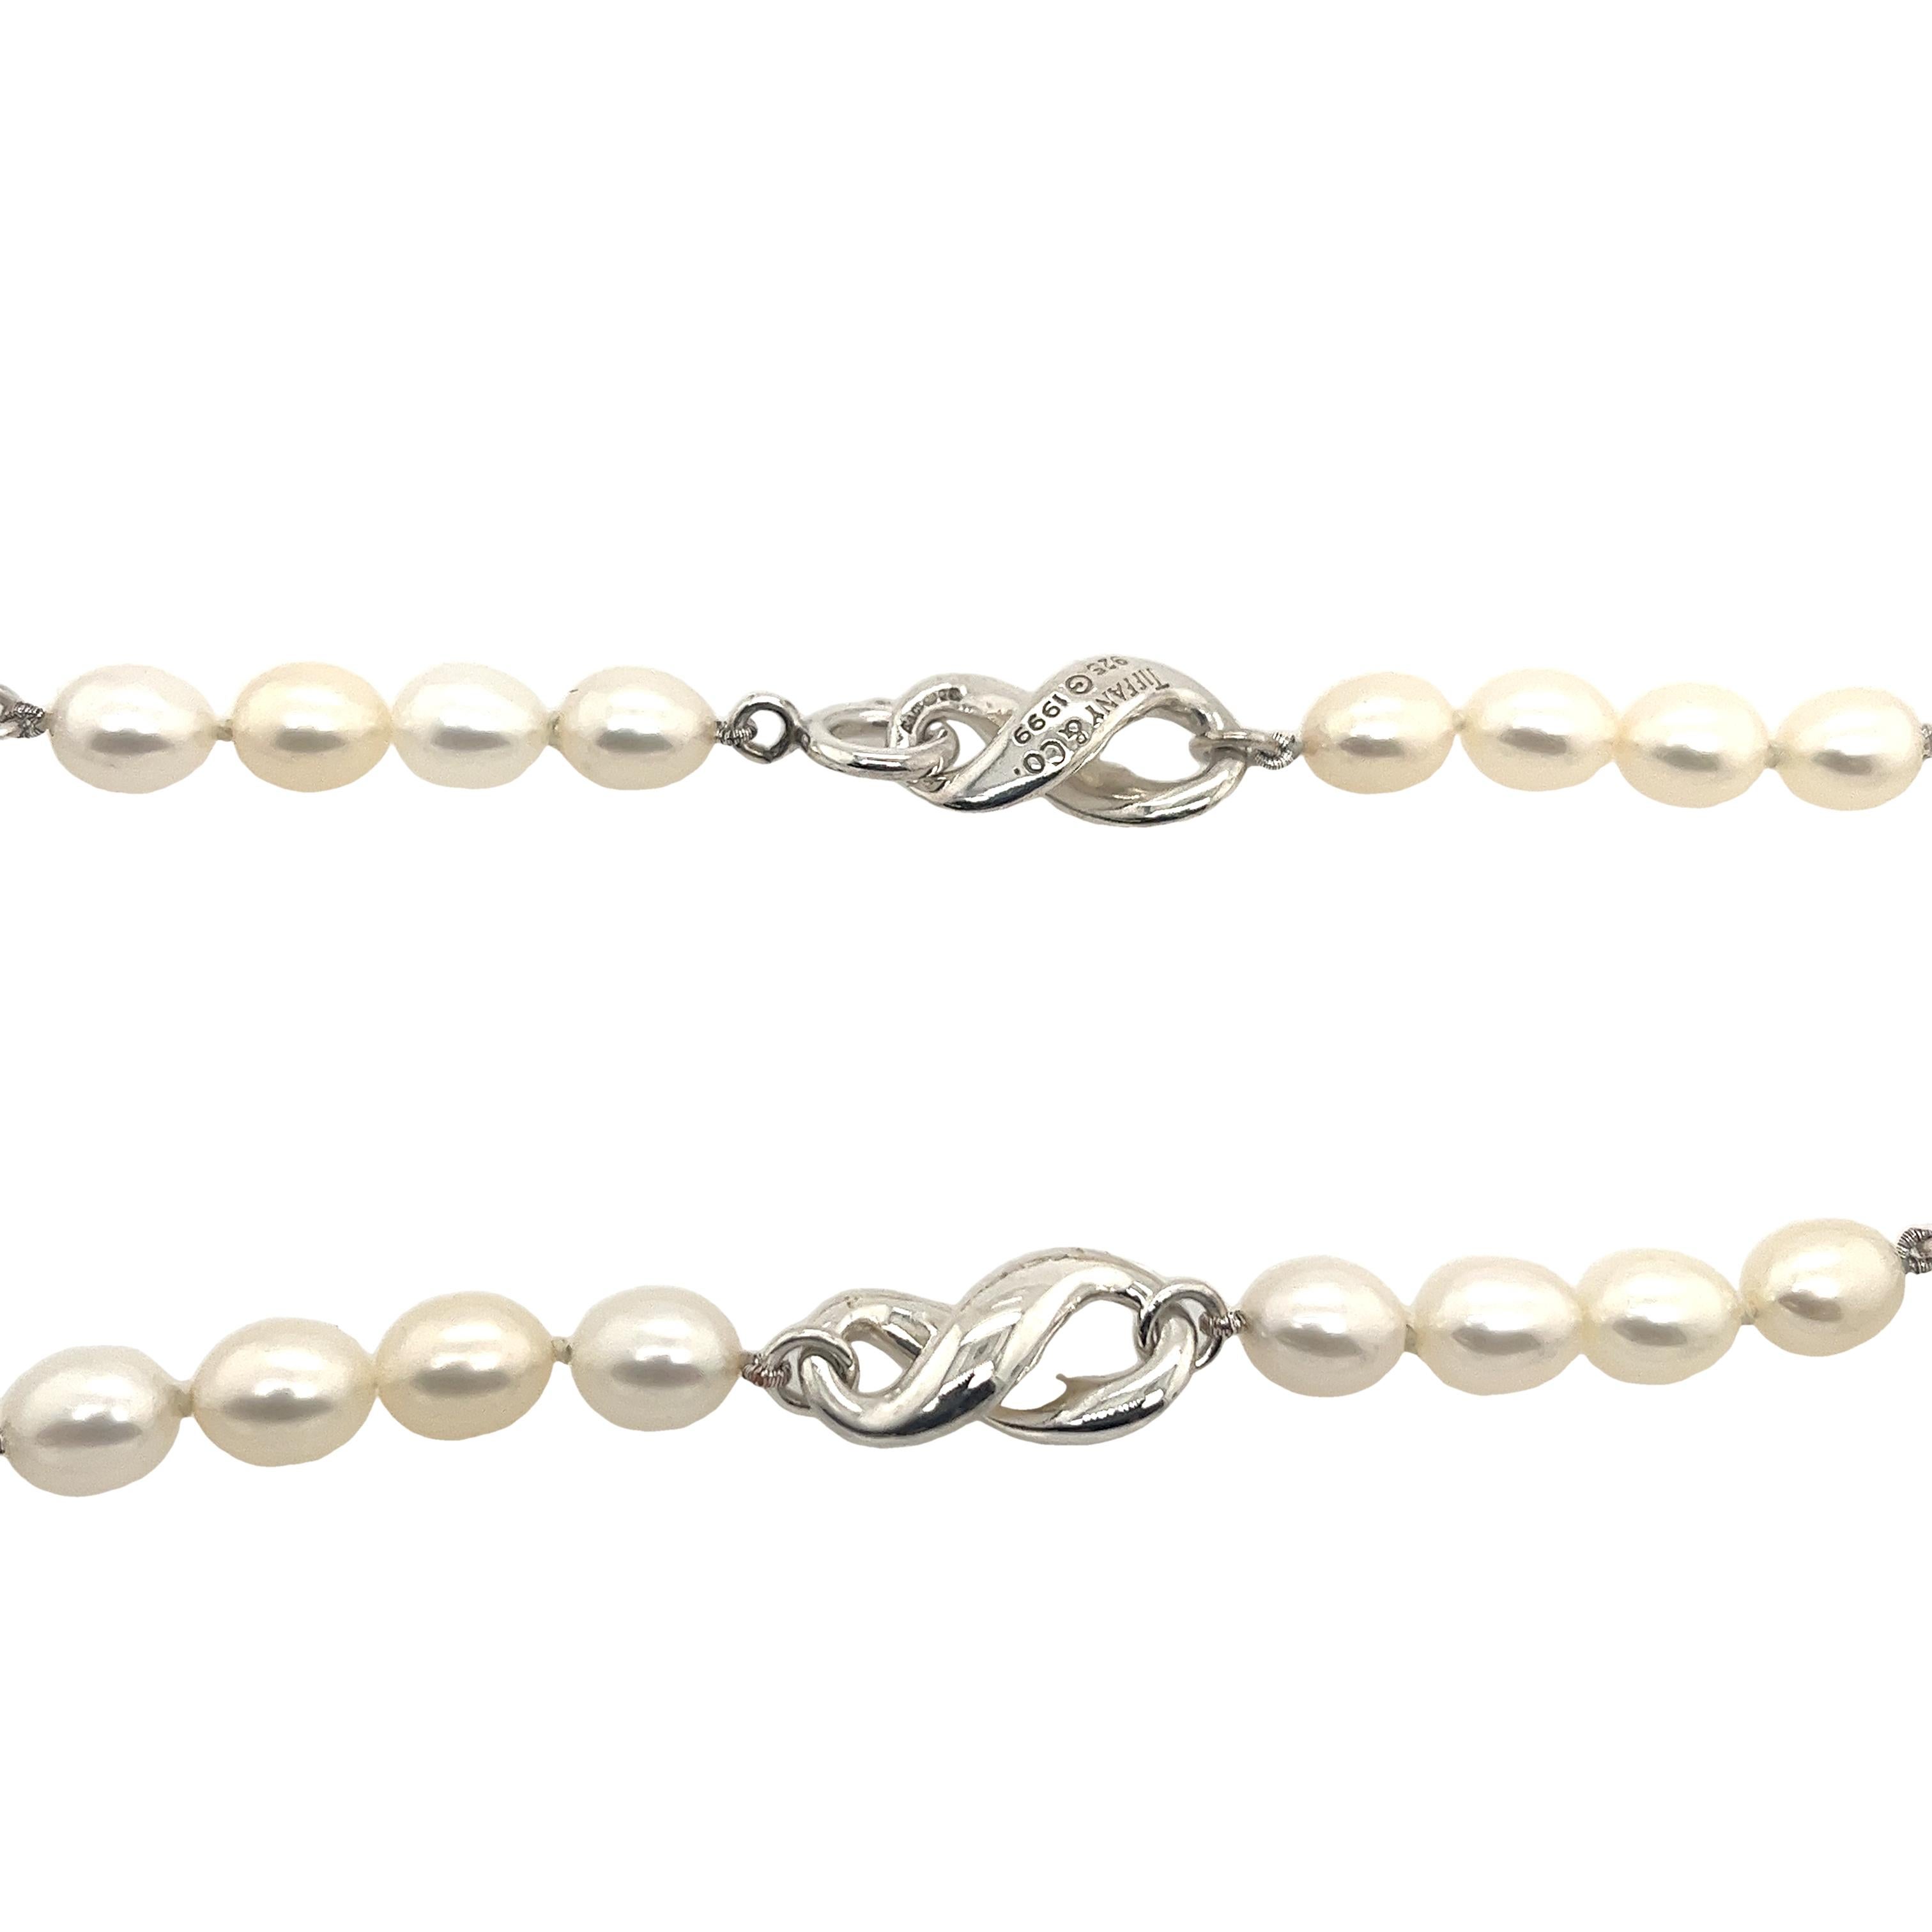 Introducing the epitome of elegance the Tiffany & Co sterling silver infinity figure white pearl necklace.  
This breathtaking necklace combines timeless beauty and contemporary style in one enchanting piece.
It is engraved: TIFFANY & CO 925 
1999.